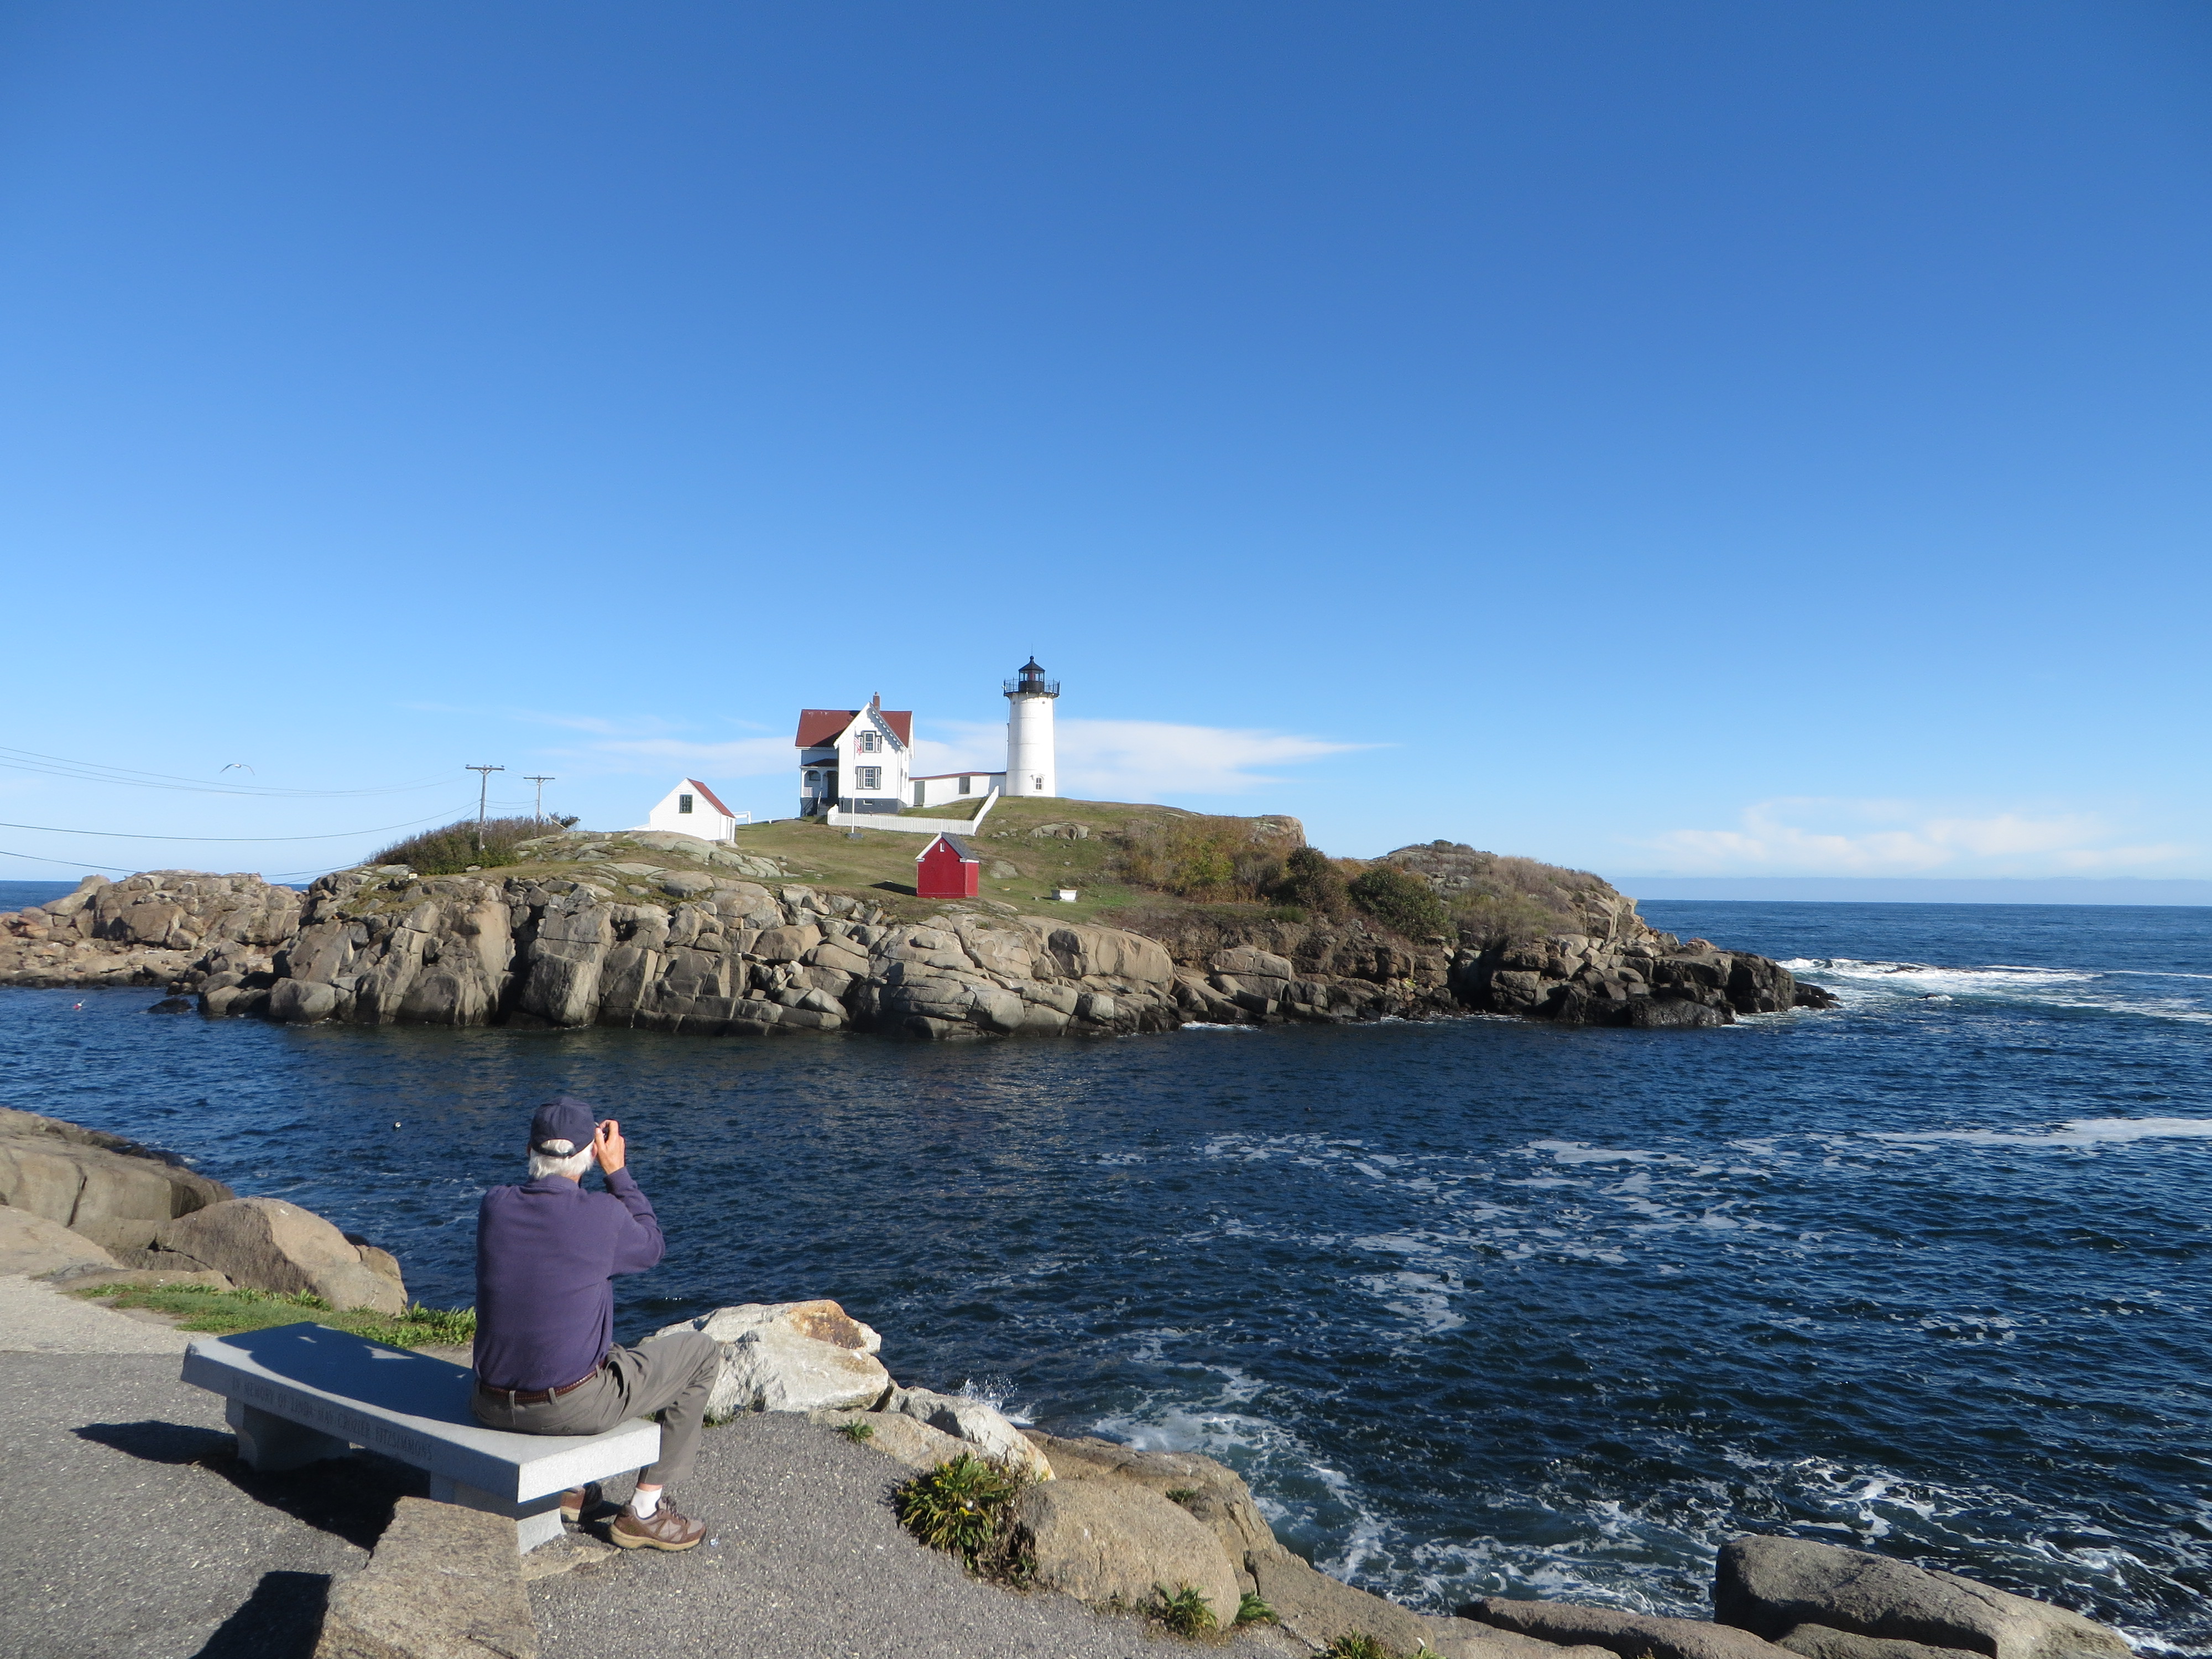 Nubble Lighthouse in York Maine at Sohier Park